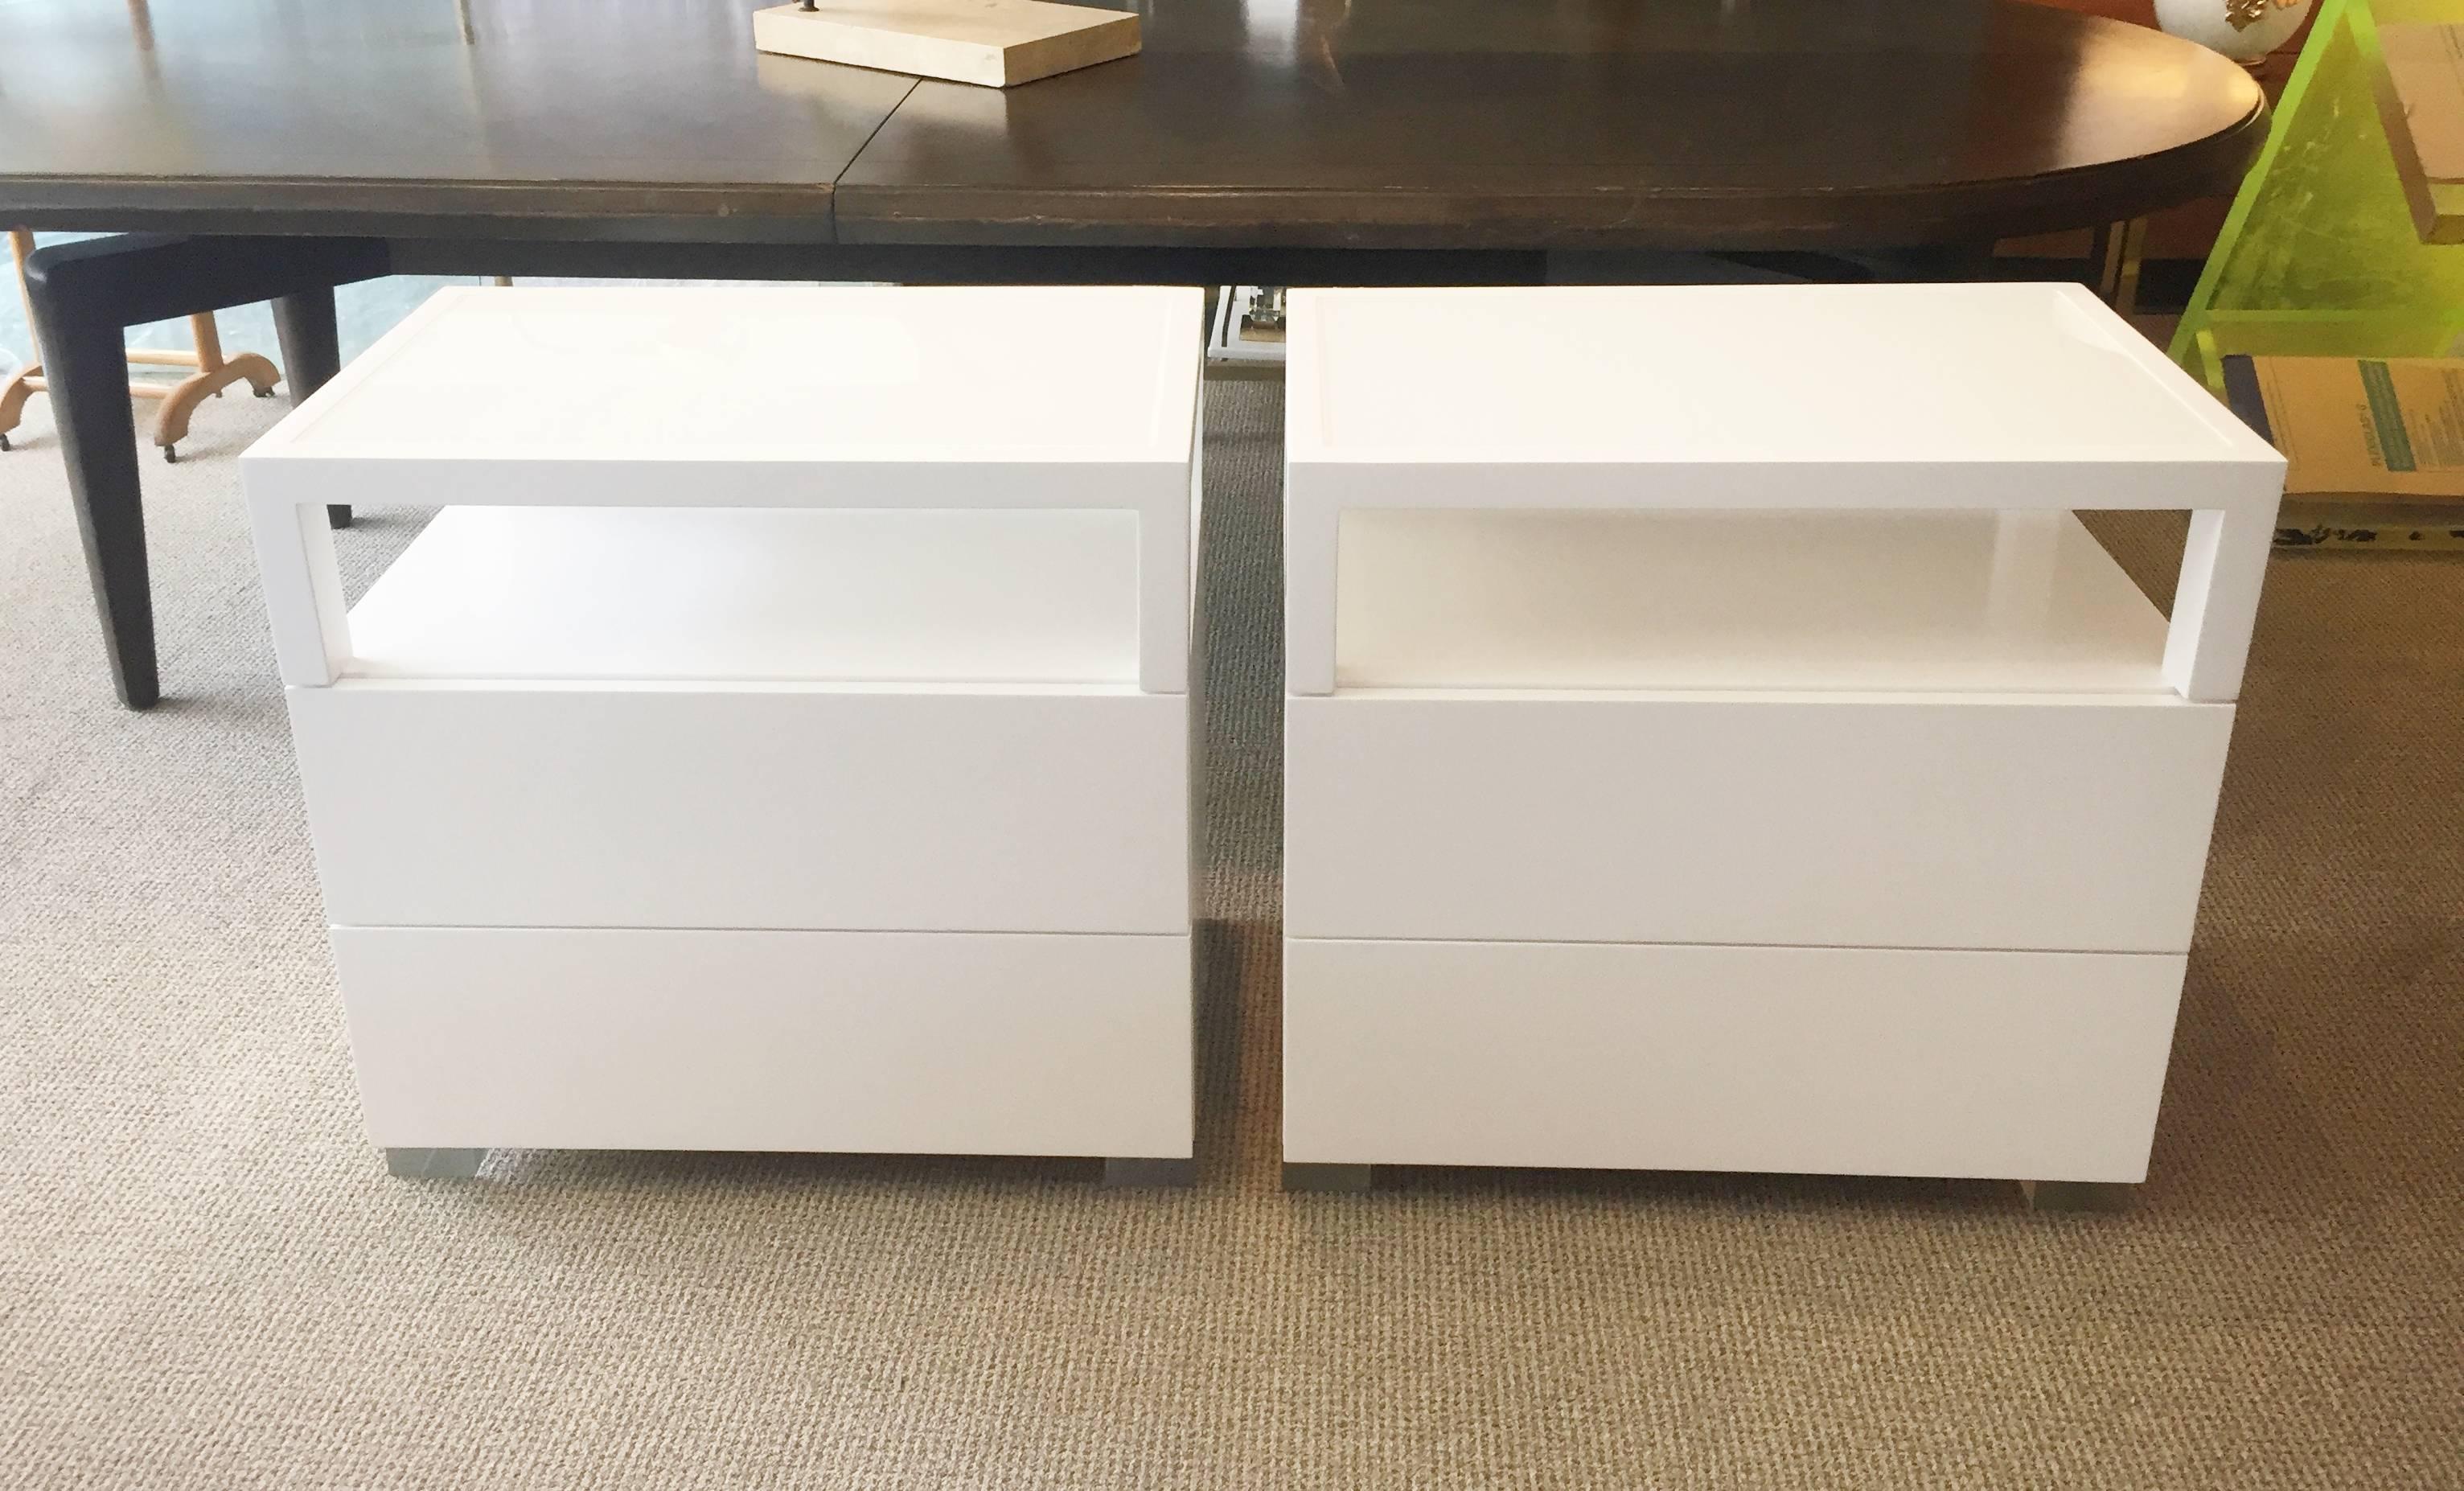 Beautiful pair of nightstands made of solid white oak and Lucite with a milk glass tops.

The pieces have beautiful lines and great presence, they are solidly built and crafted locally.

The nightstands come with two drawers for storage and it